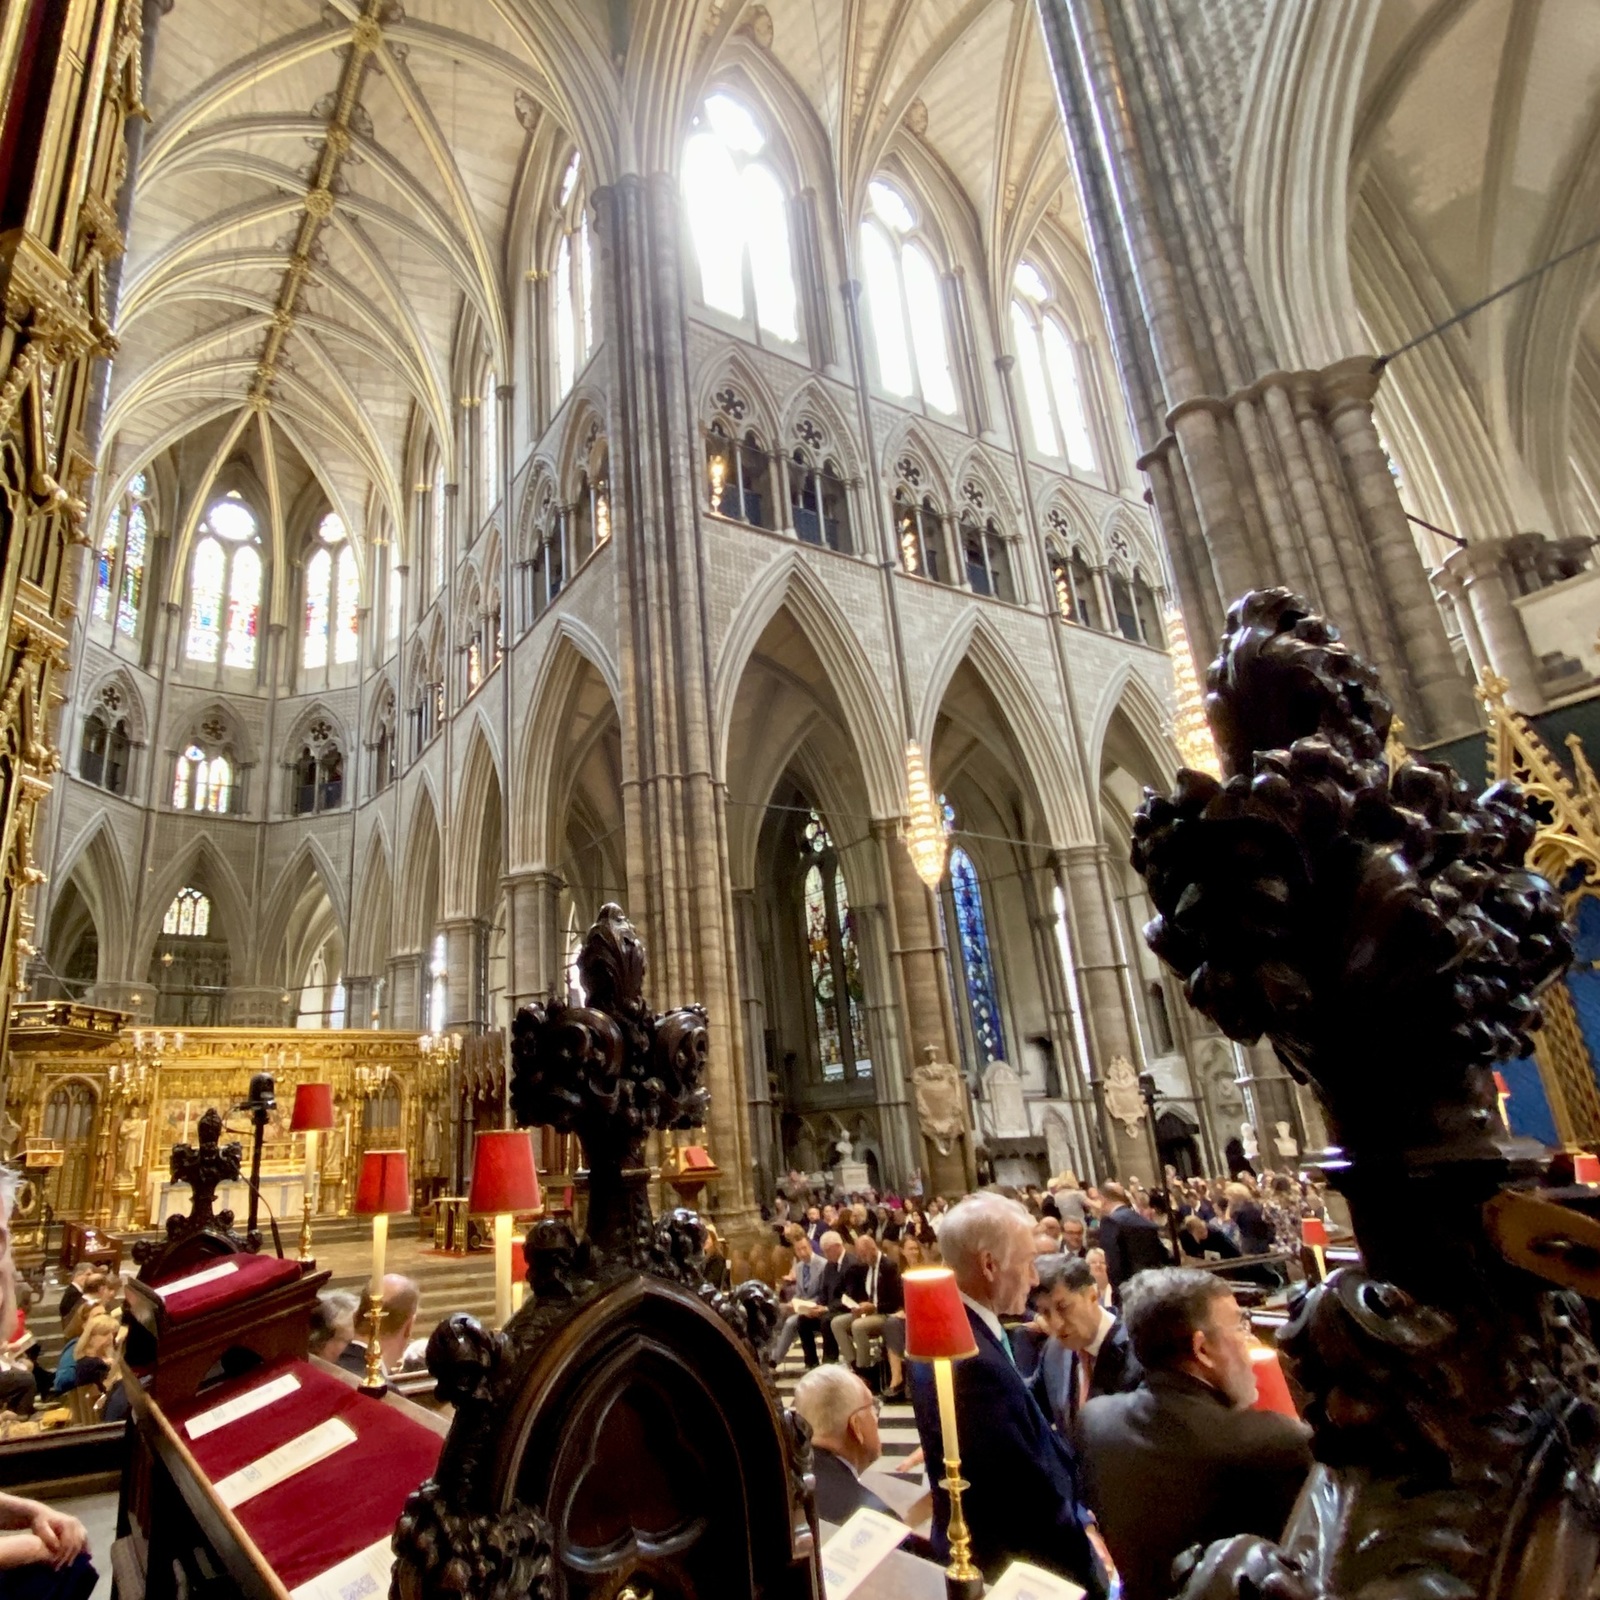 5 July 2023 - Deeply honoured to represent The City at the Service to celebrate the 75th Anniversary of the NHS at the glorious Westminster Abbey.